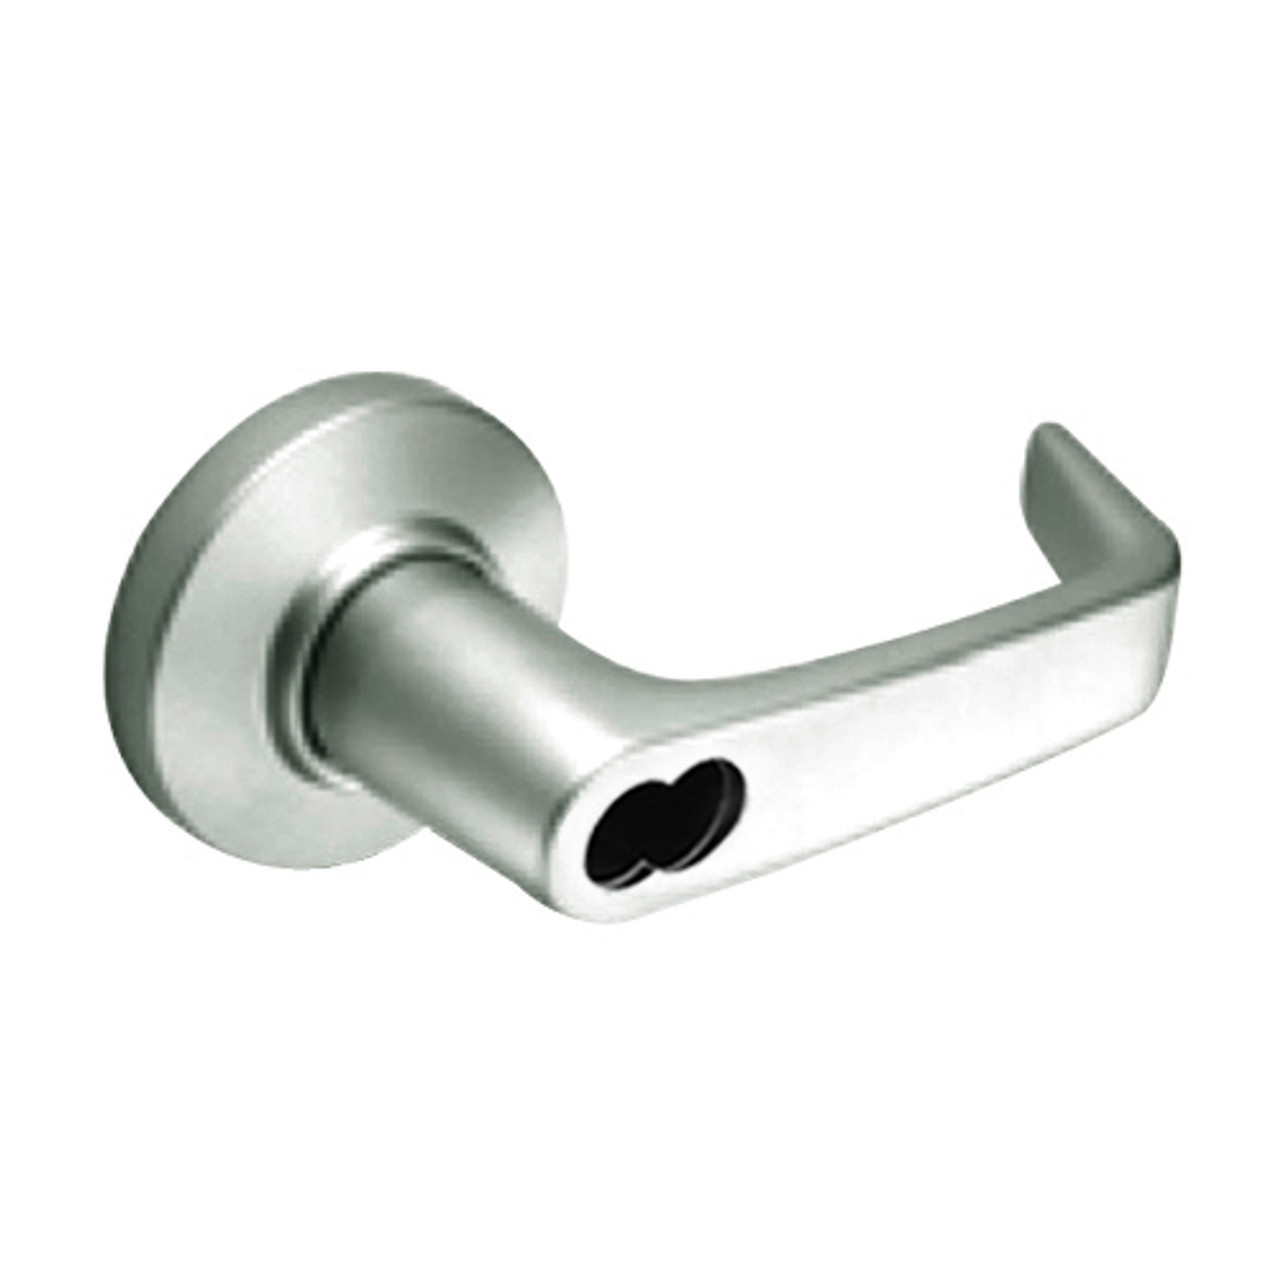 9K57AB15CS3619LM Best 9K Series Entrance Cylindrical Lever Locks with Contour Angle with Return Lever Design Accept 7 Pin Best Core in Satin Nickel